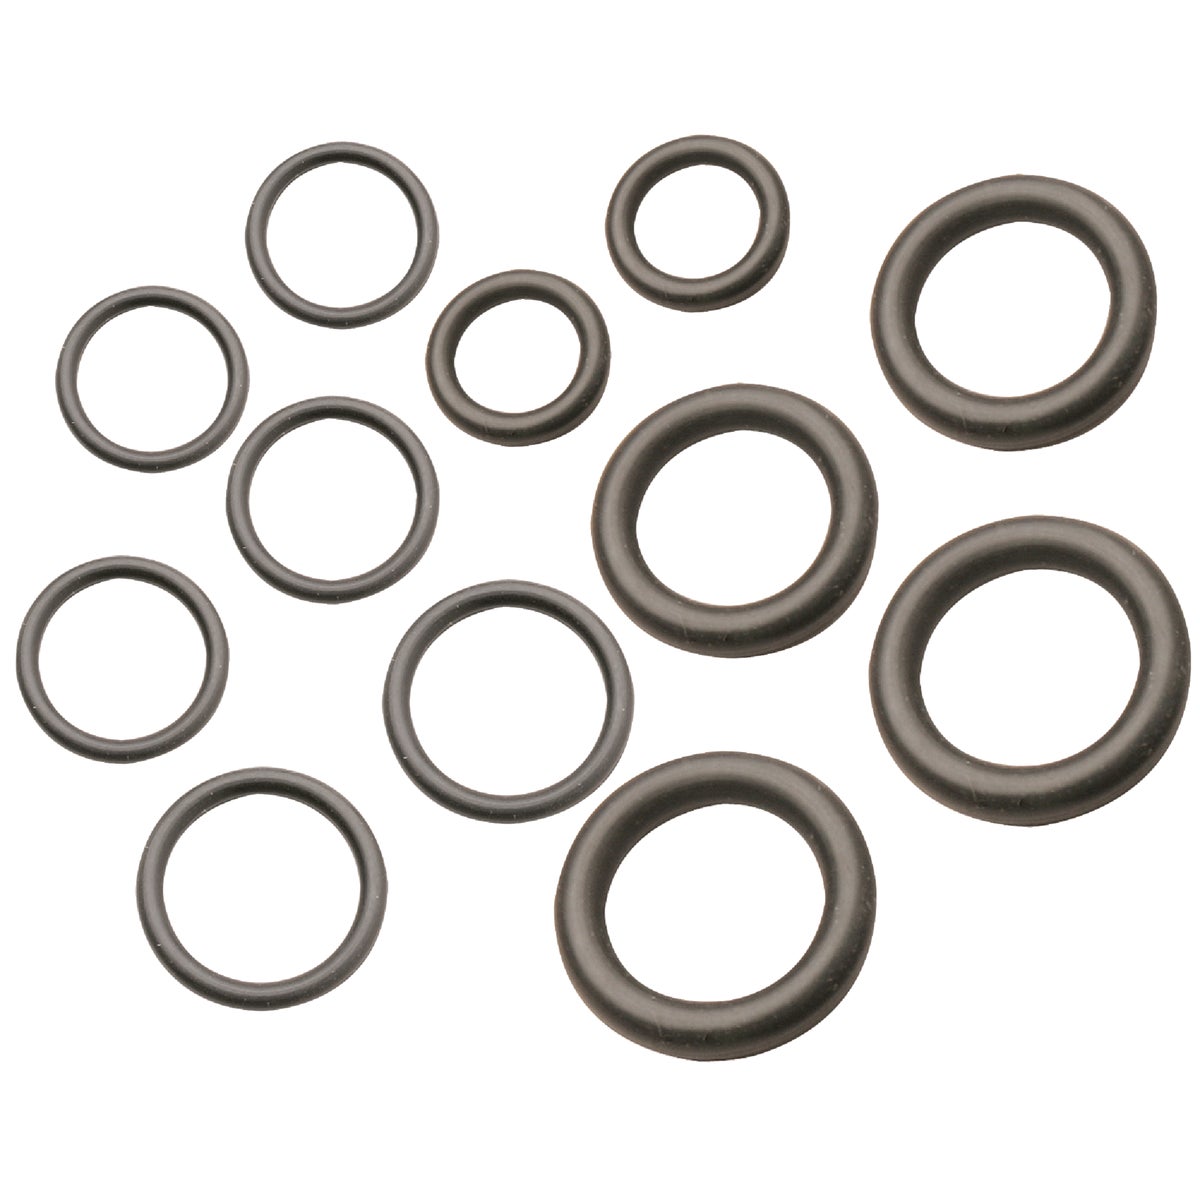 SIM Supply, Inc. 402665 Do it Assorted Large O-Rings (12-Piece) 402665